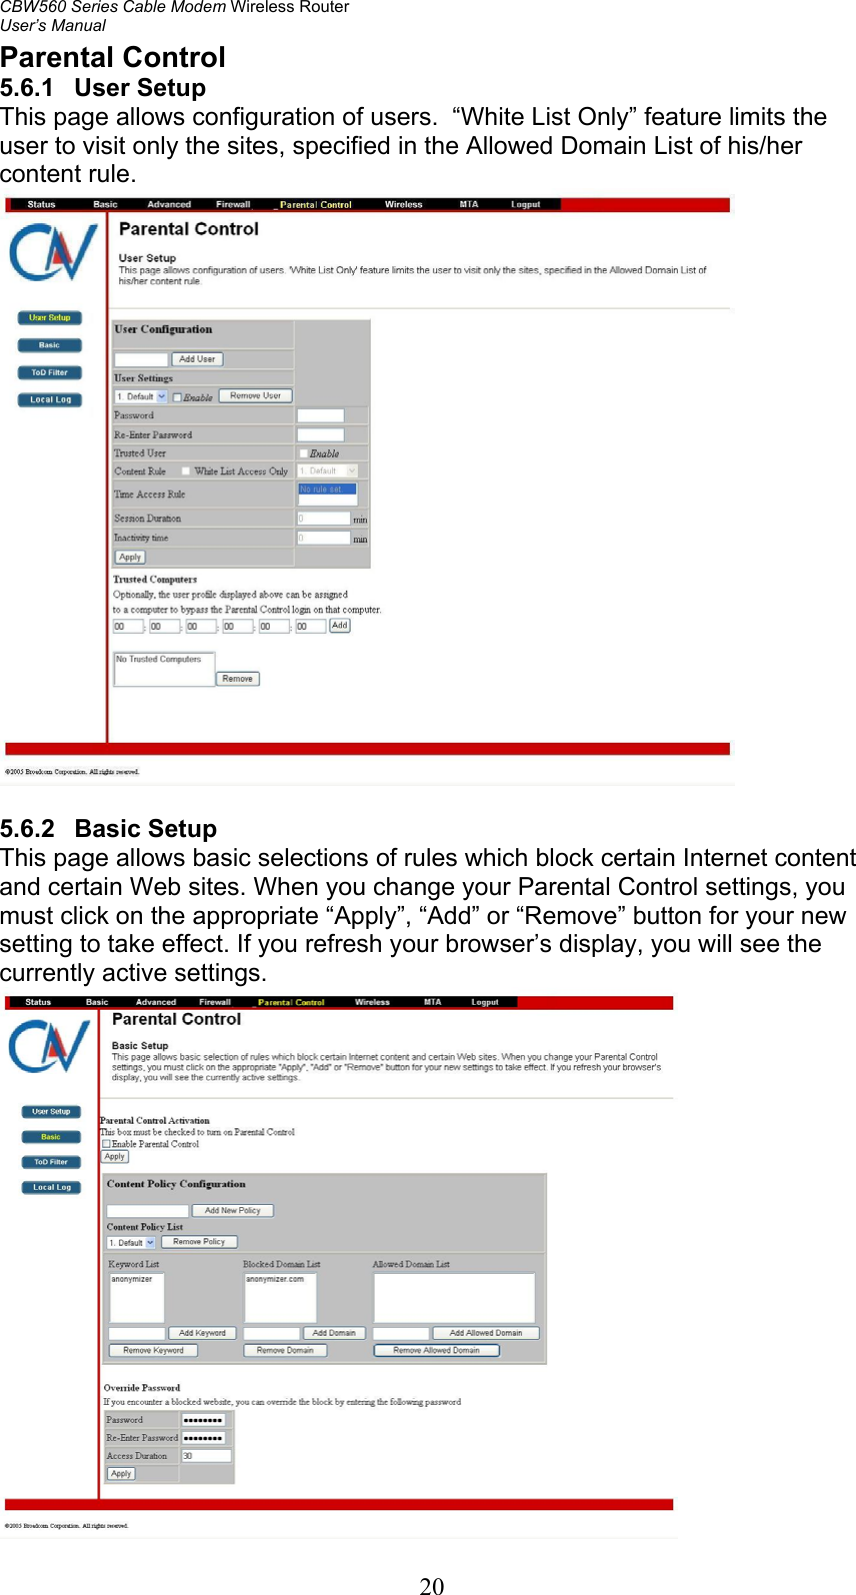 CBW560 Series Cable Modem Wireless Router User’s Manual 20 Parental Control 5.6.1 User Setup This page allows configuration of users.  “White List Only” feature limits the user to visit only the sites, specified in the Allowed Domain List of his/her content rule.   5.6.2   Basic Setup This page allows basic selections of rules which block certain Internet content and certain Web sites. When you change your Parental Control settings, you must click on the appropriate “Apply”, “Add” or “Remove” button for your new setting to take effect. If you refresh your browser’s display, you will see the currently active settings.  